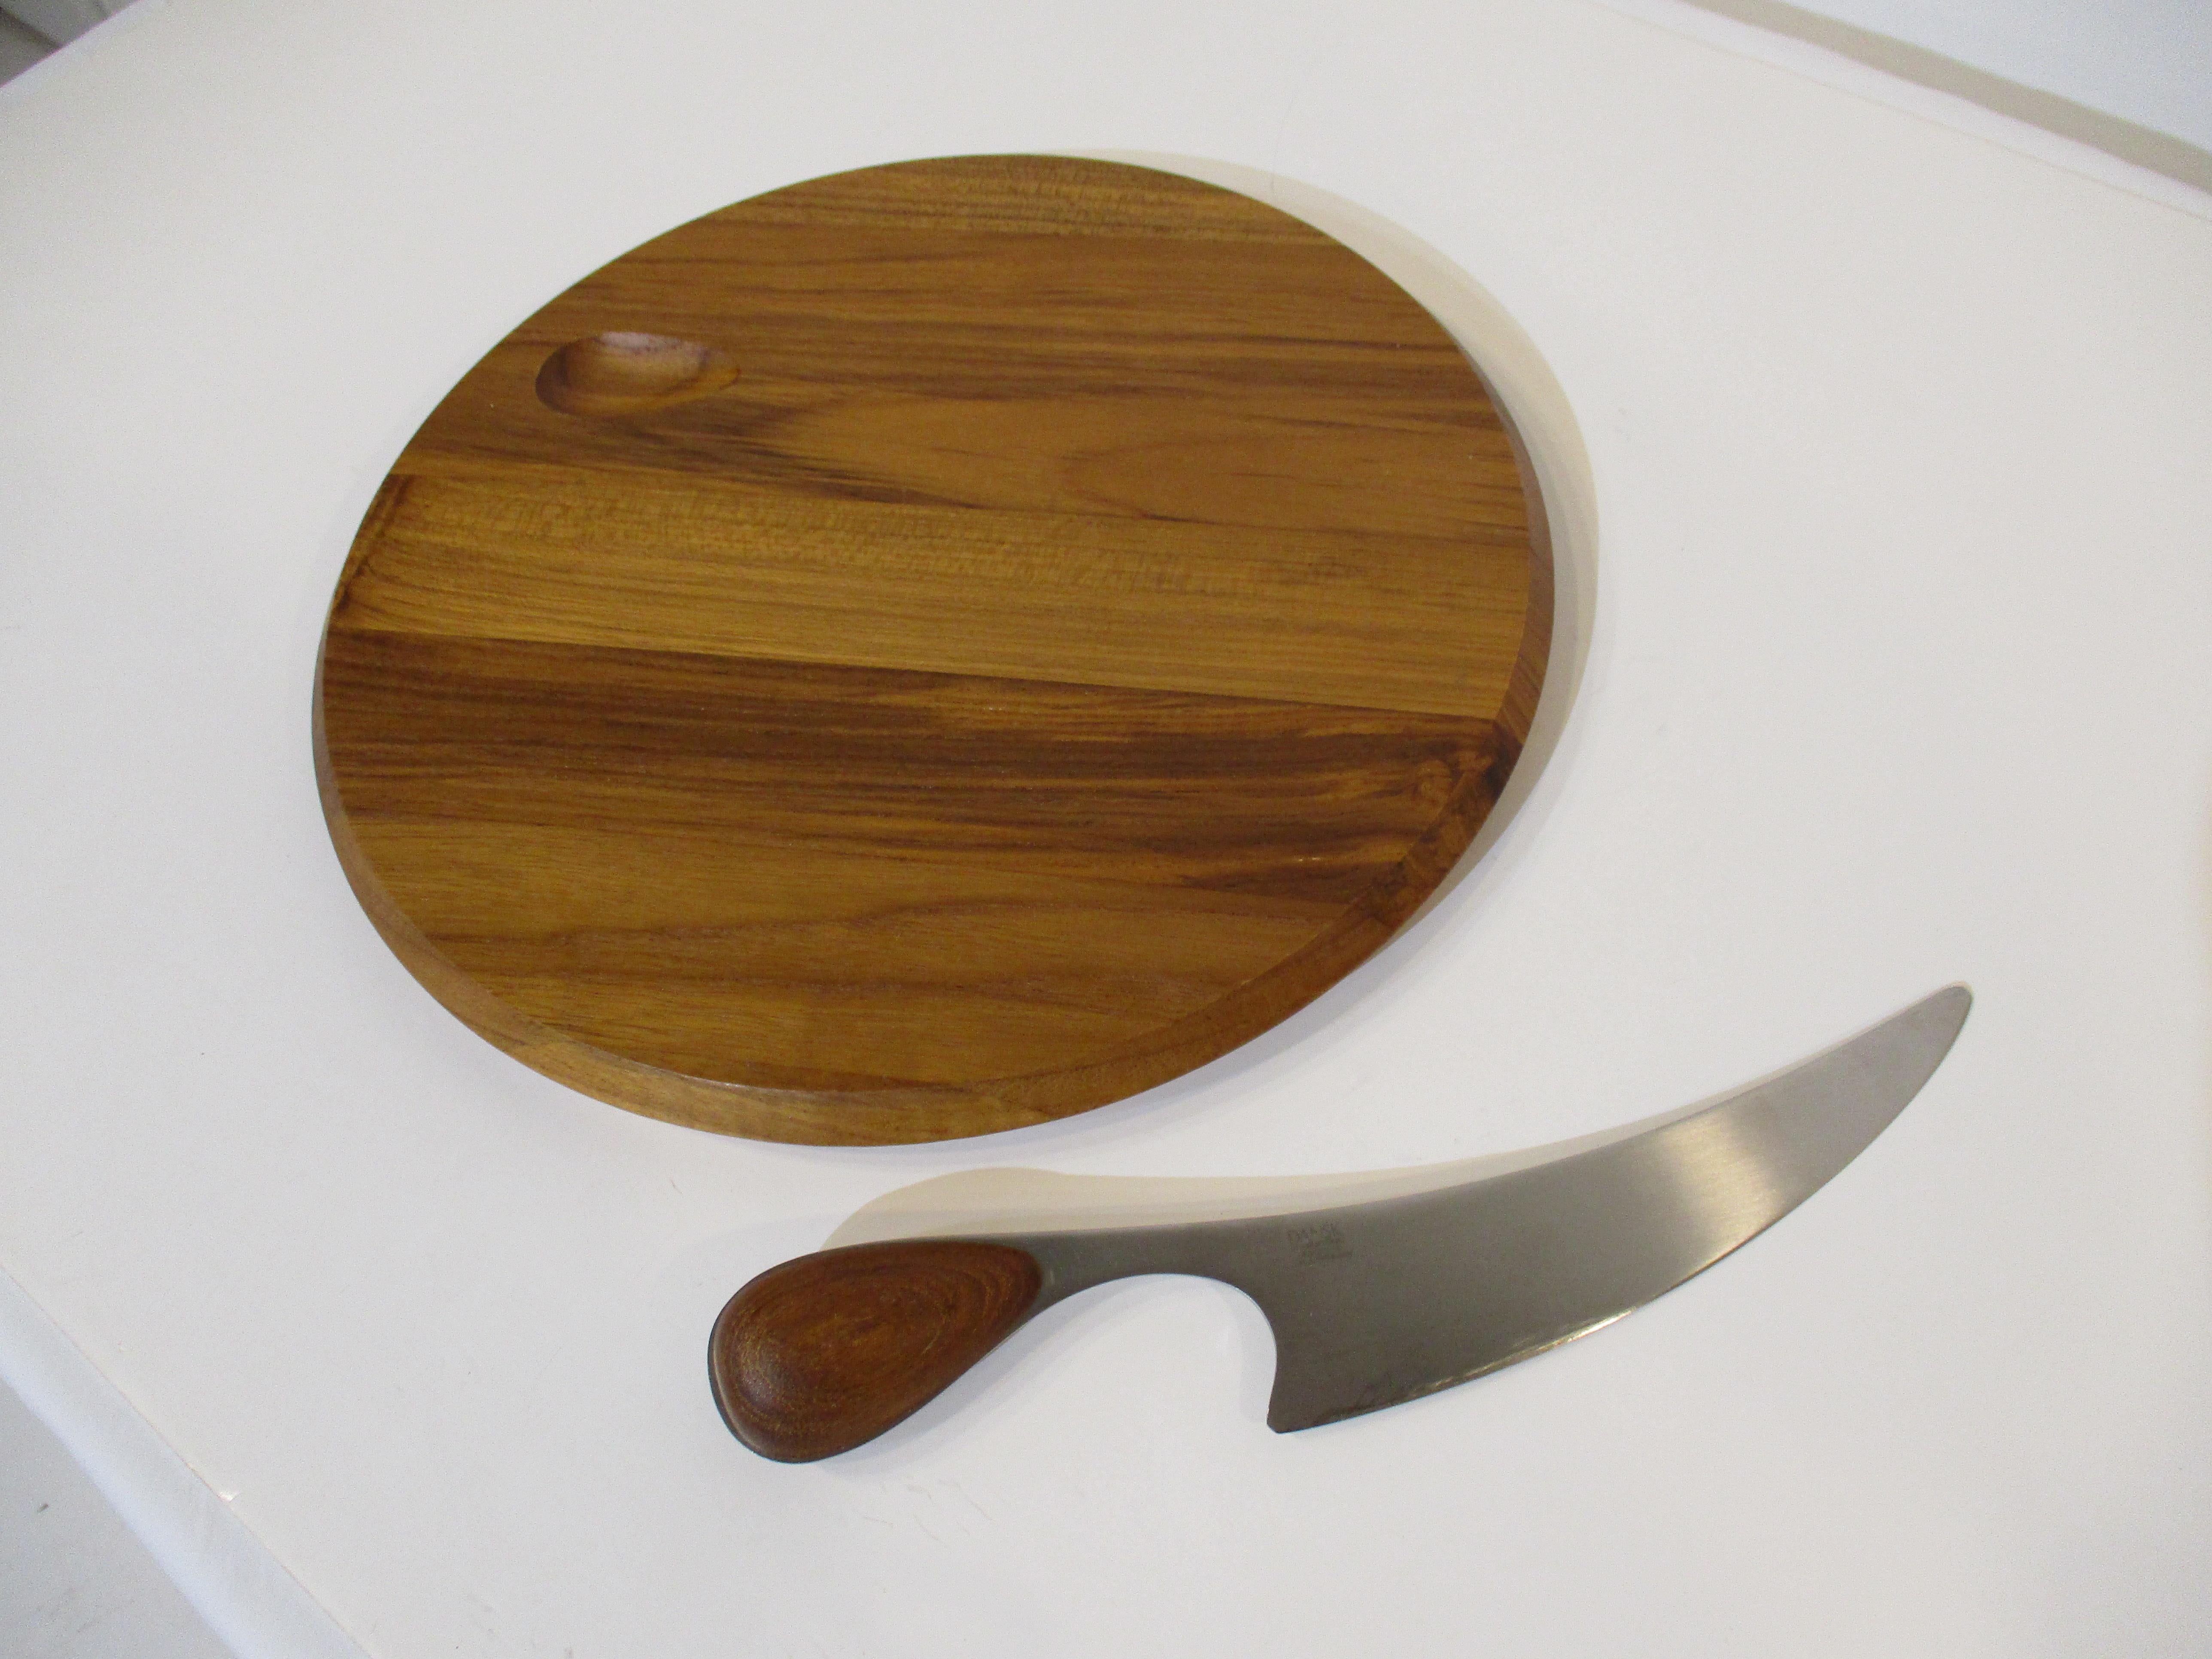 A very well crafted staved teak wood cheese board with carved out area to the top edge of the board for the handle of the knife to sit . The large stainless steel curved bladed knife has a matching teak handle and the boards edge is tapered and